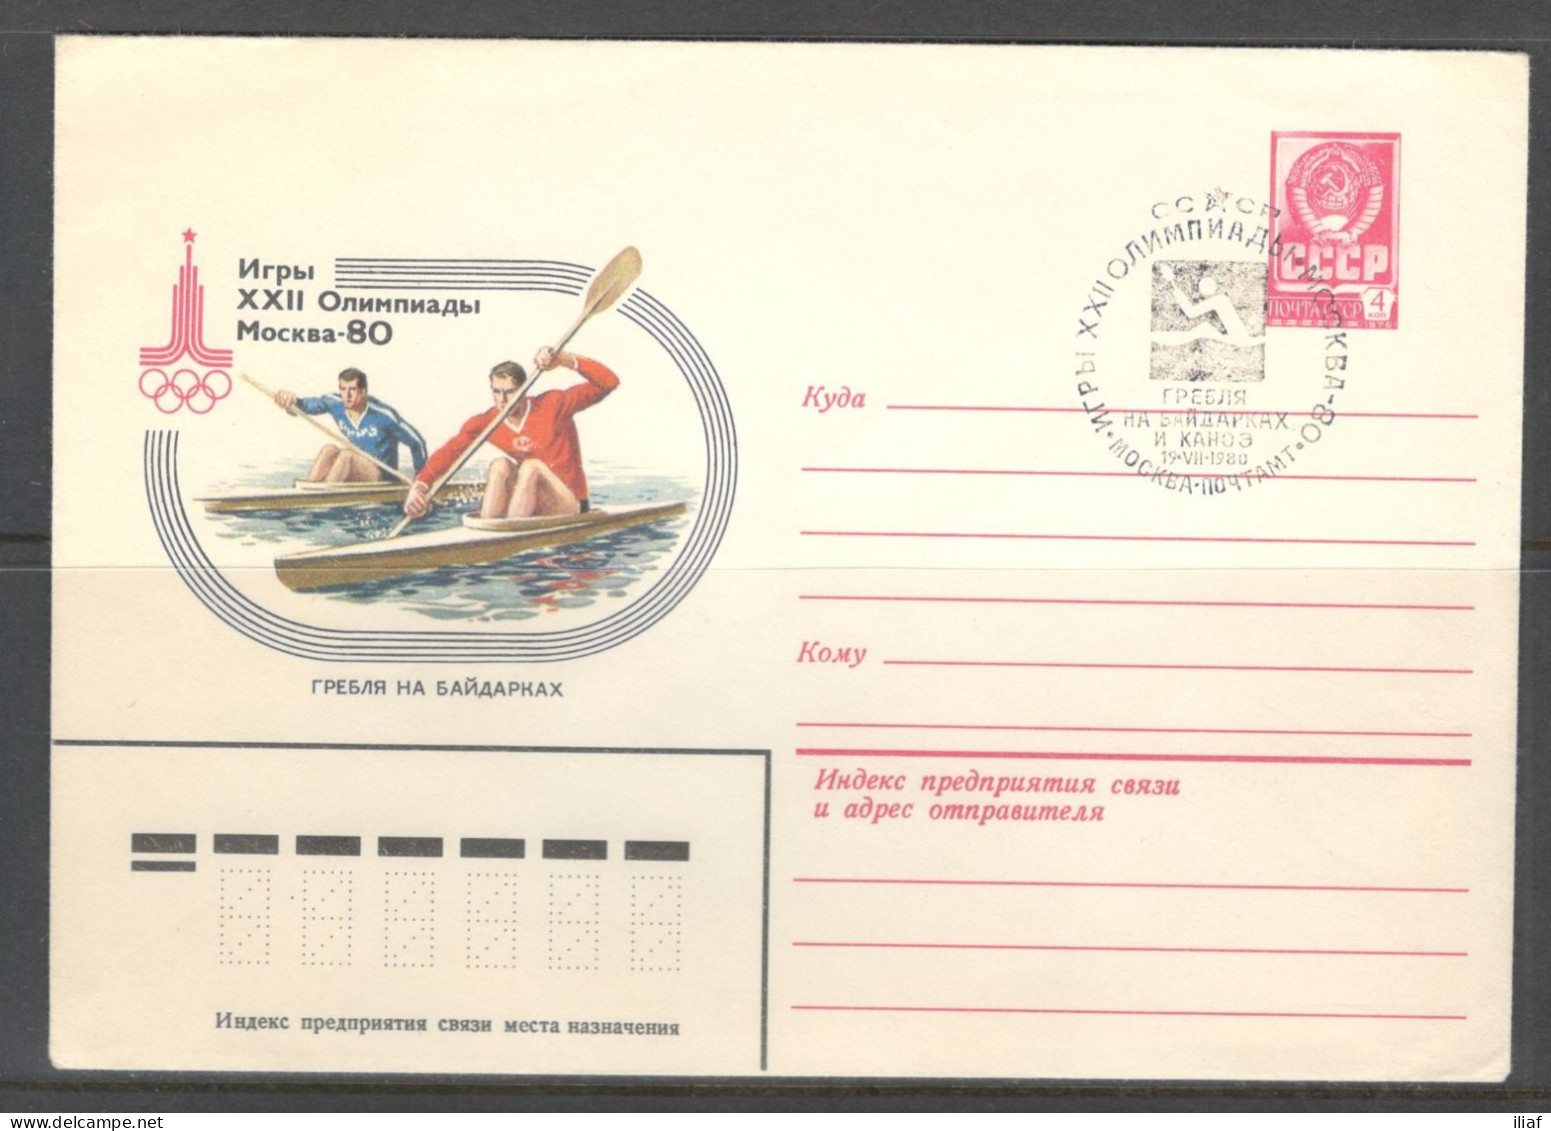 RUSSIA & USSR. Games Of The 22nd Olympiad Moscow-80. Kayaking And Canoeing.  Illustrated Envelope With Special Cancellat - Estate 1980: Mosca